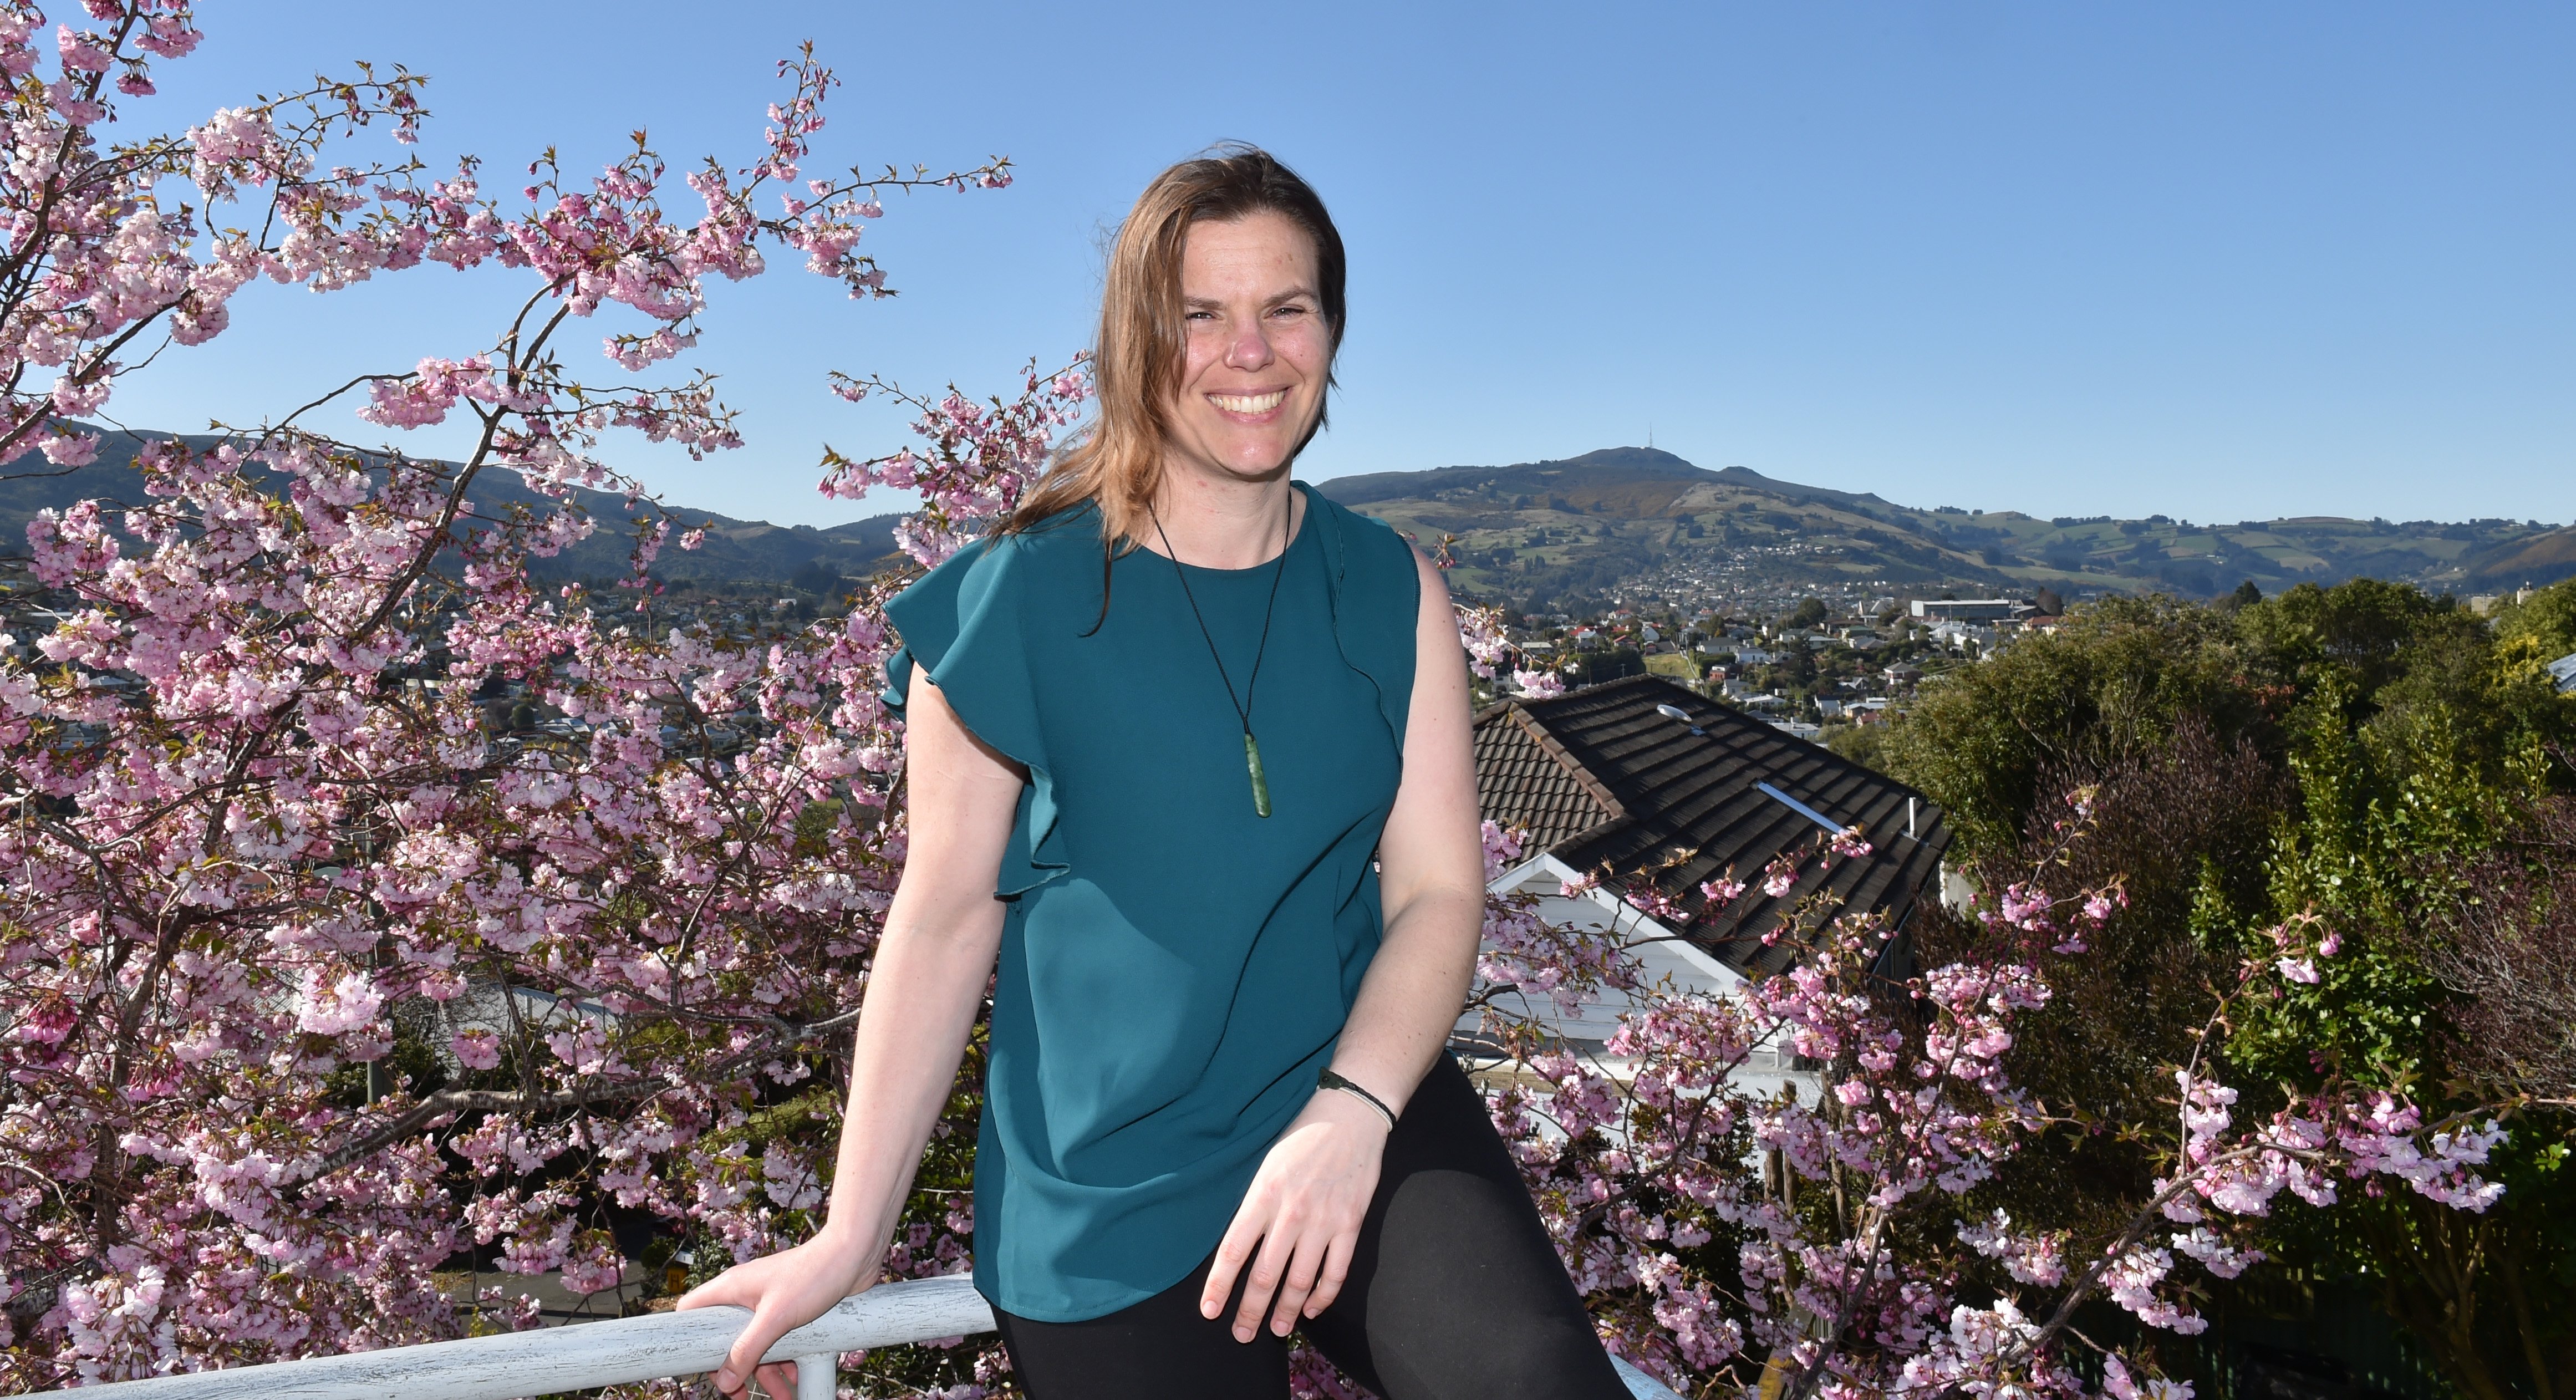 Kristie Amadio aims to establish a world-class facility in Dunedin to treat eating disorders....